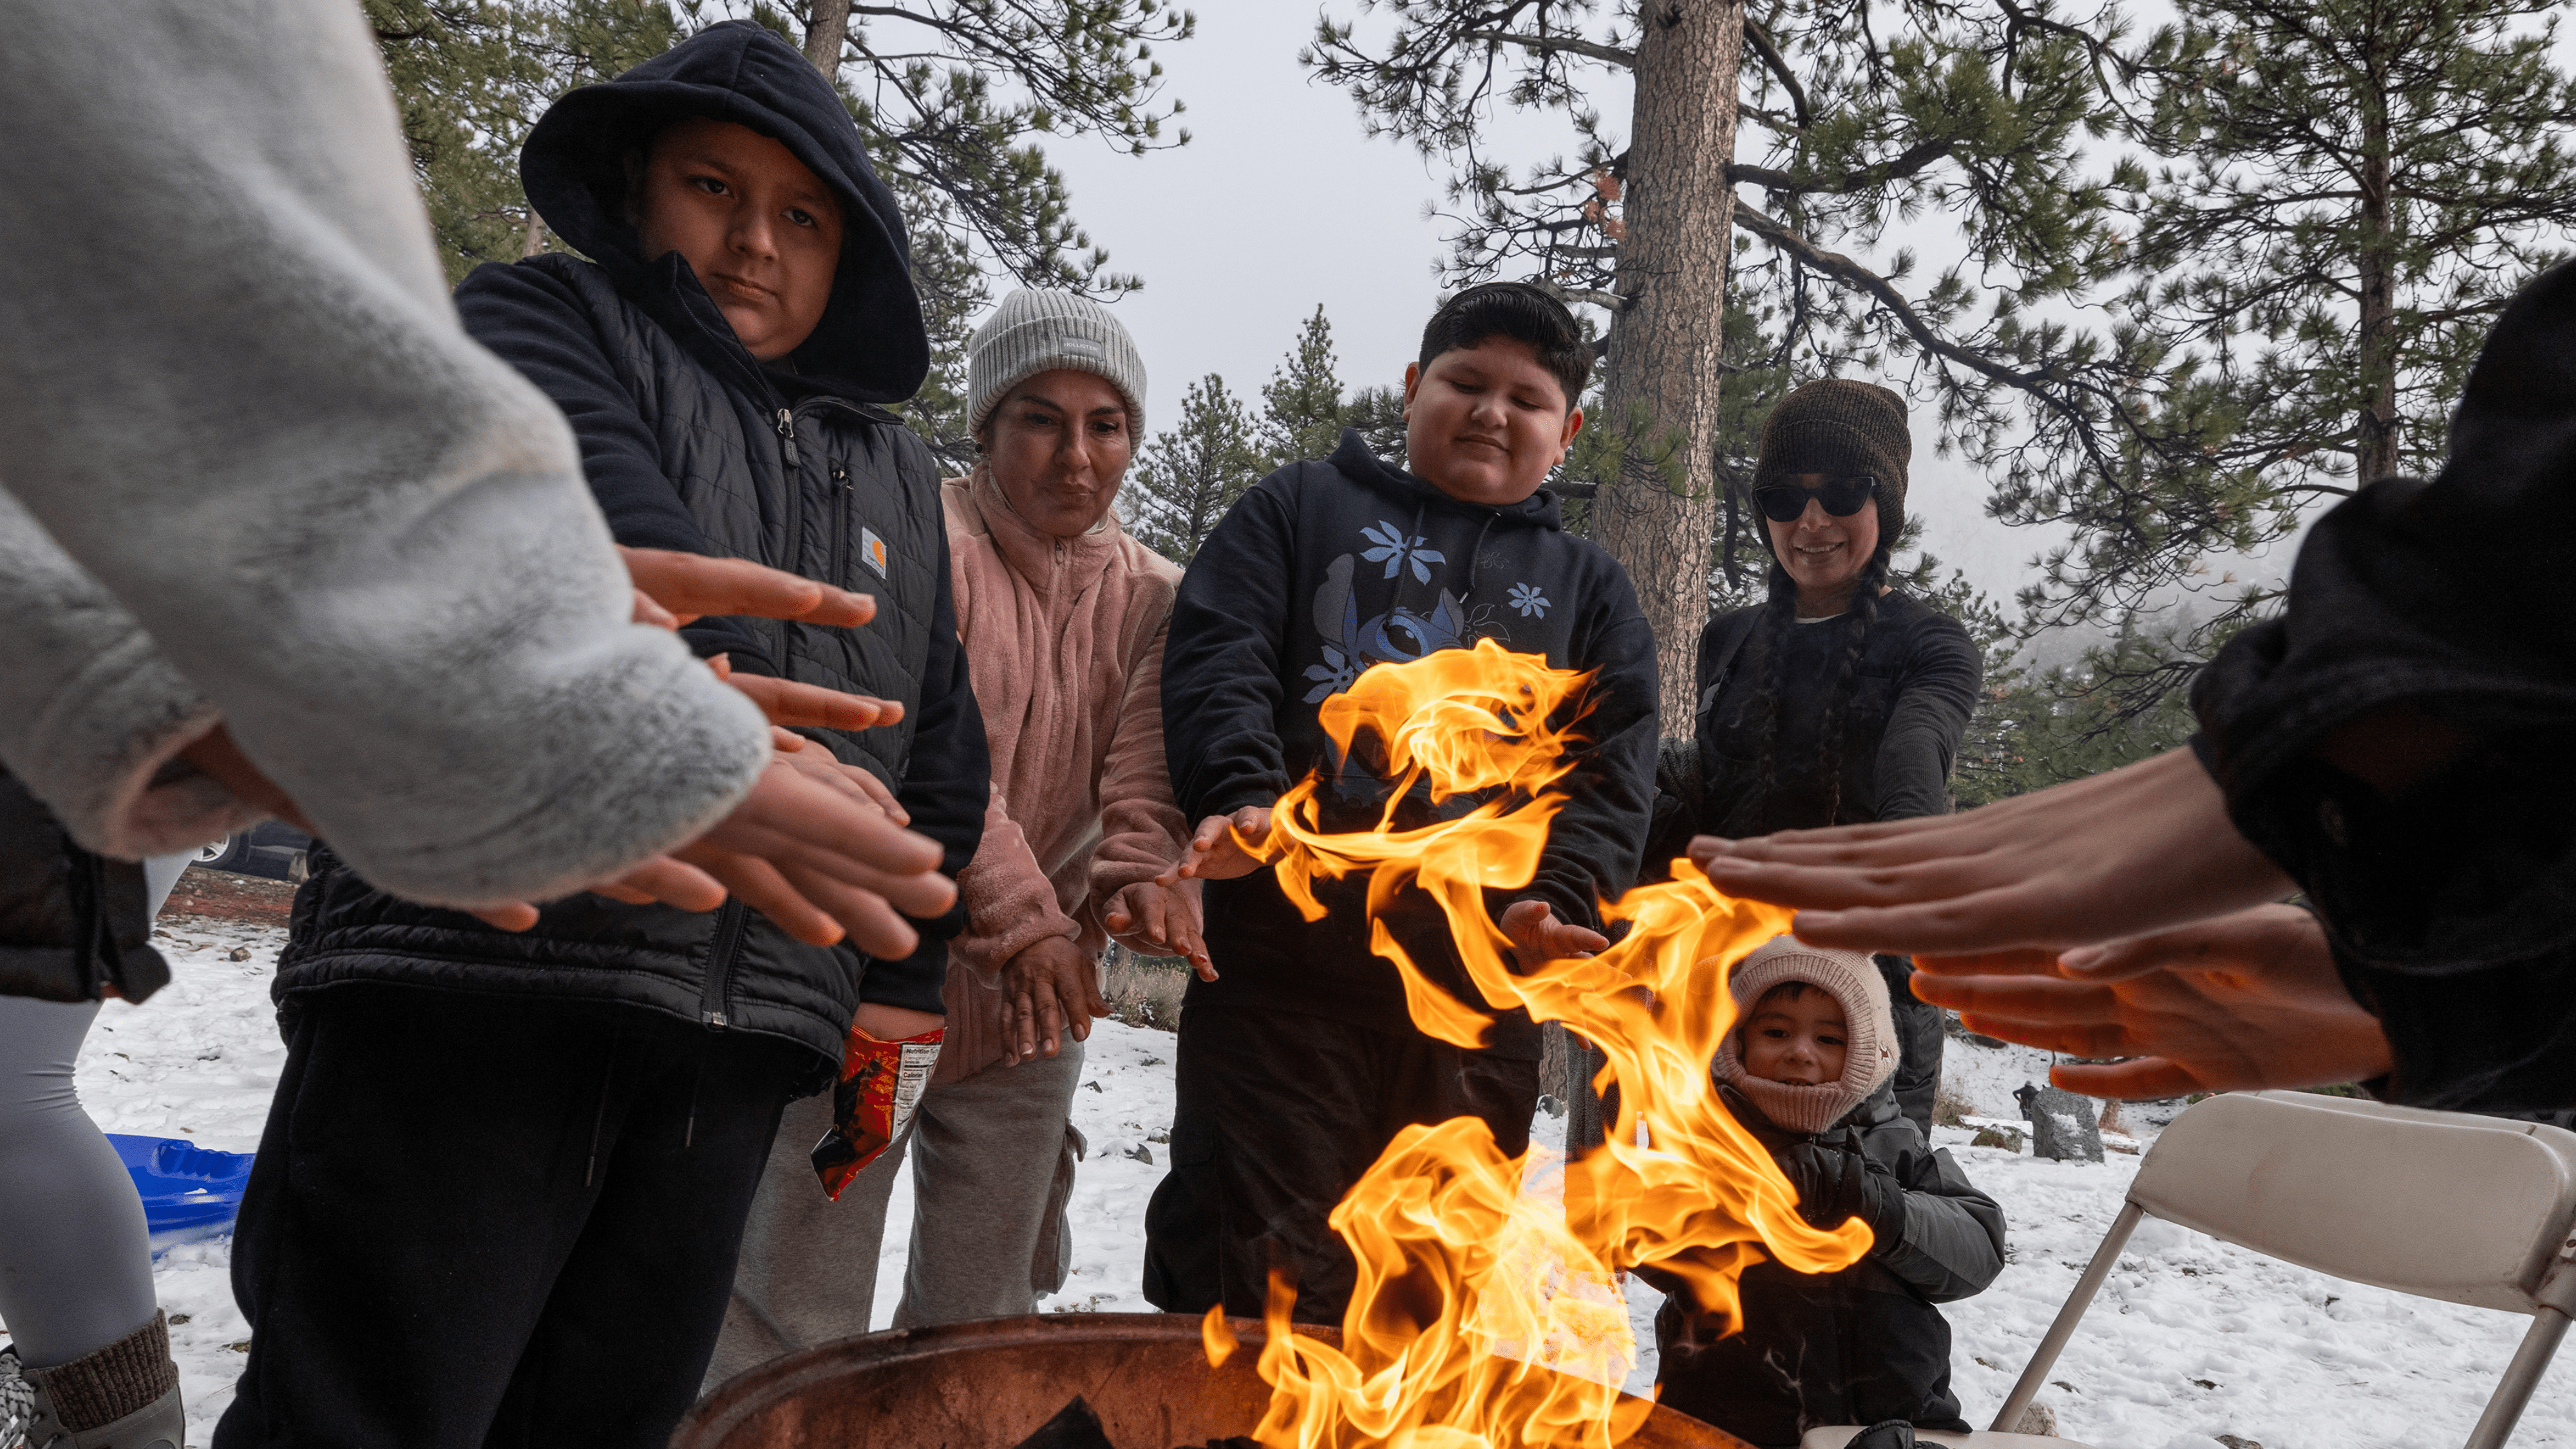 Mt. Baldy, CA - January 03: The Solano family warms their hands around a fire at a chilly Manker Flat Campground on Wednesday, Jan. 3, 2024 in Mt. Baldy, CA.